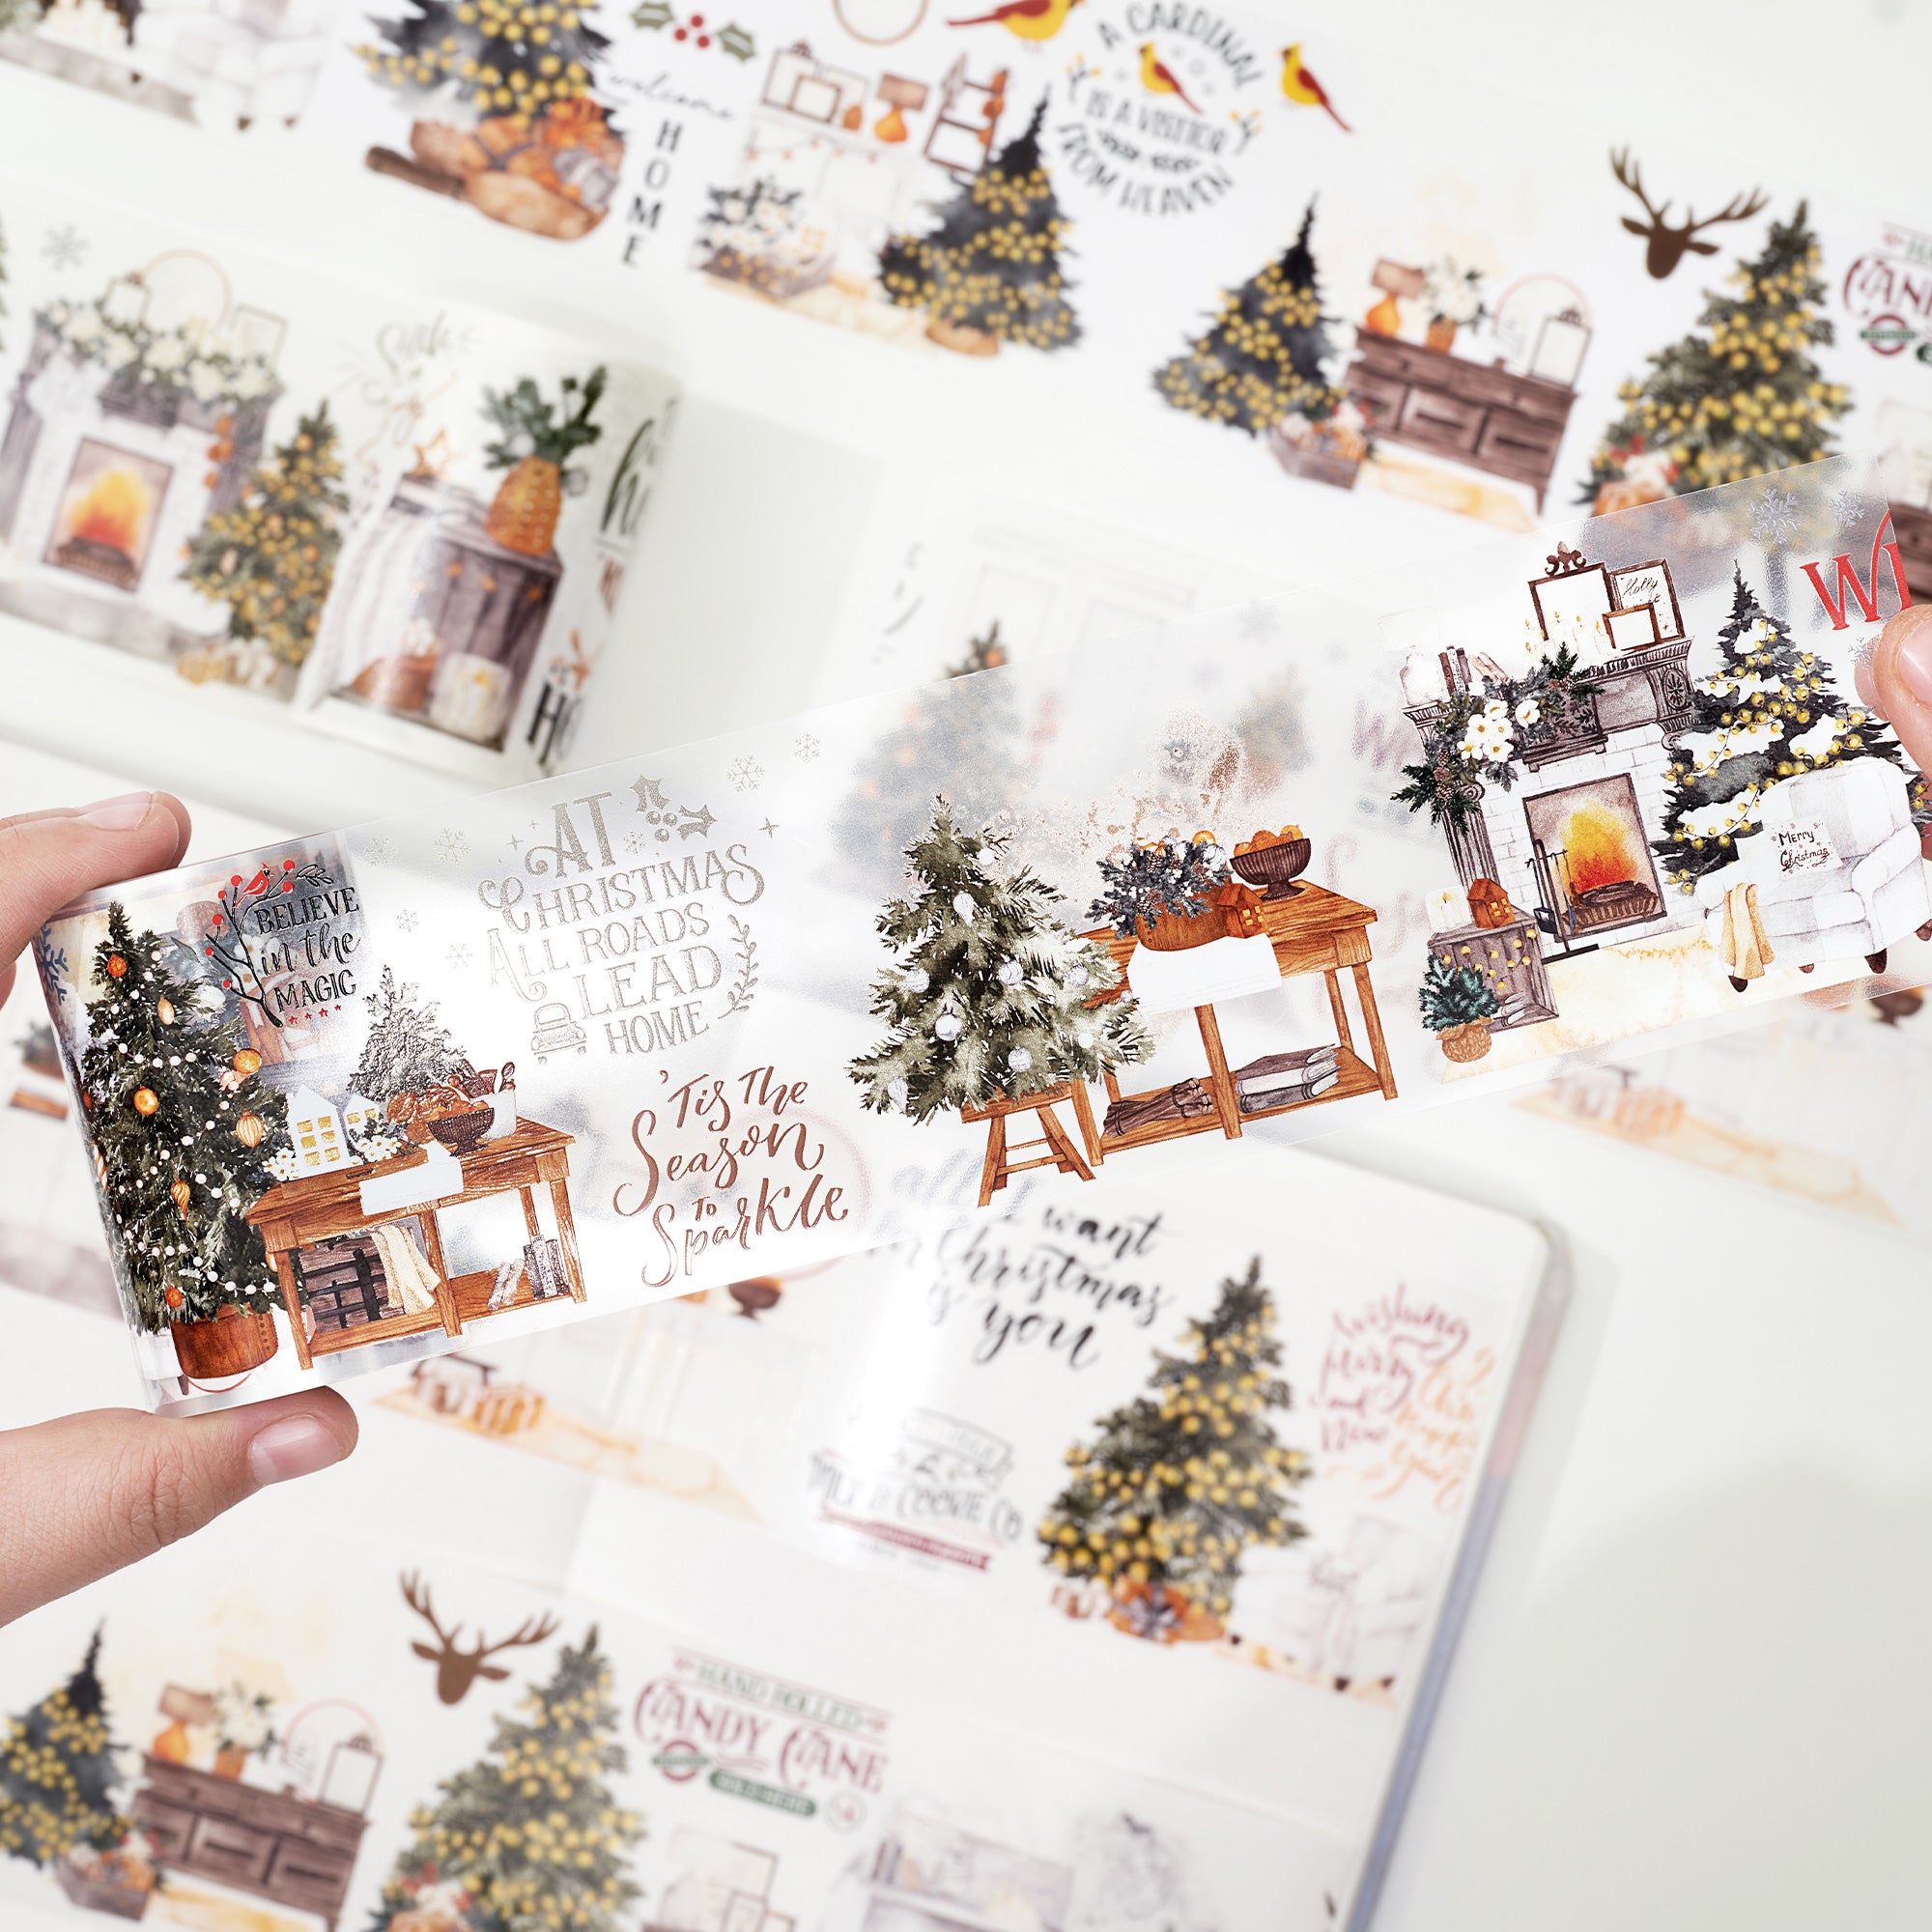 FREE Christmas Stickers & Washi Tape! - A Country Girl's Life